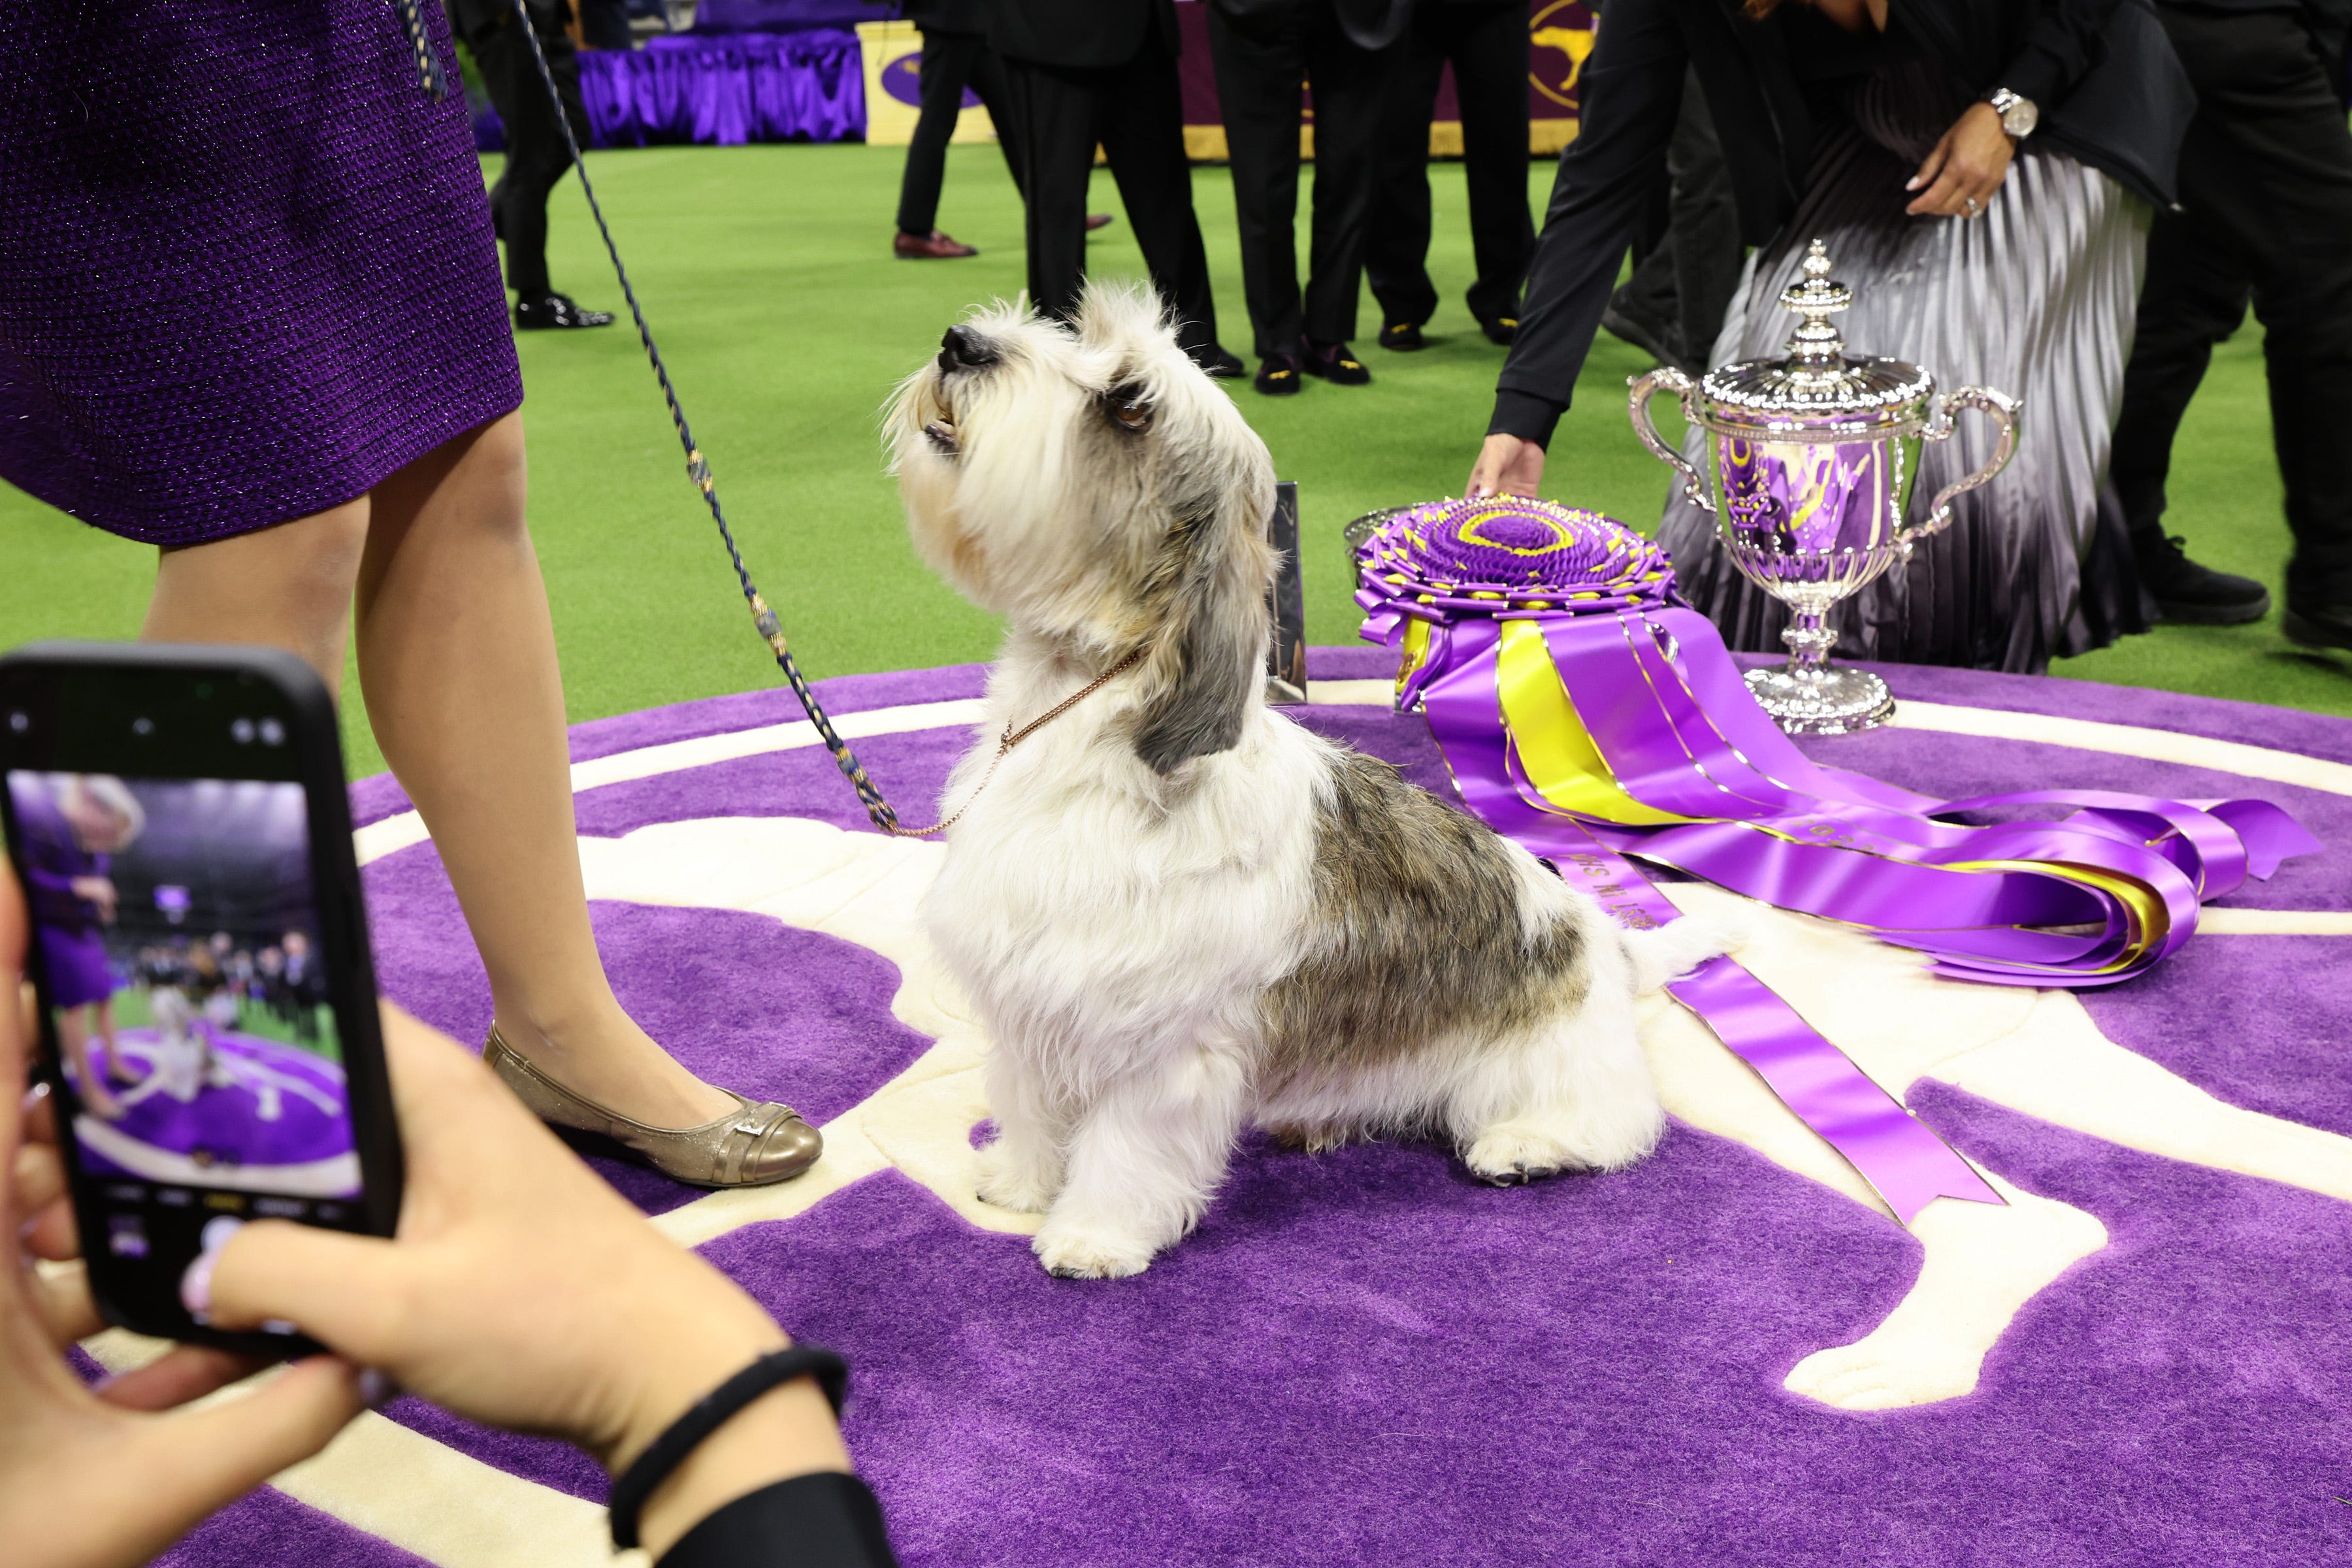 Meet Buddy Holly, Westminster Dog Show winner for 'Best in Show'